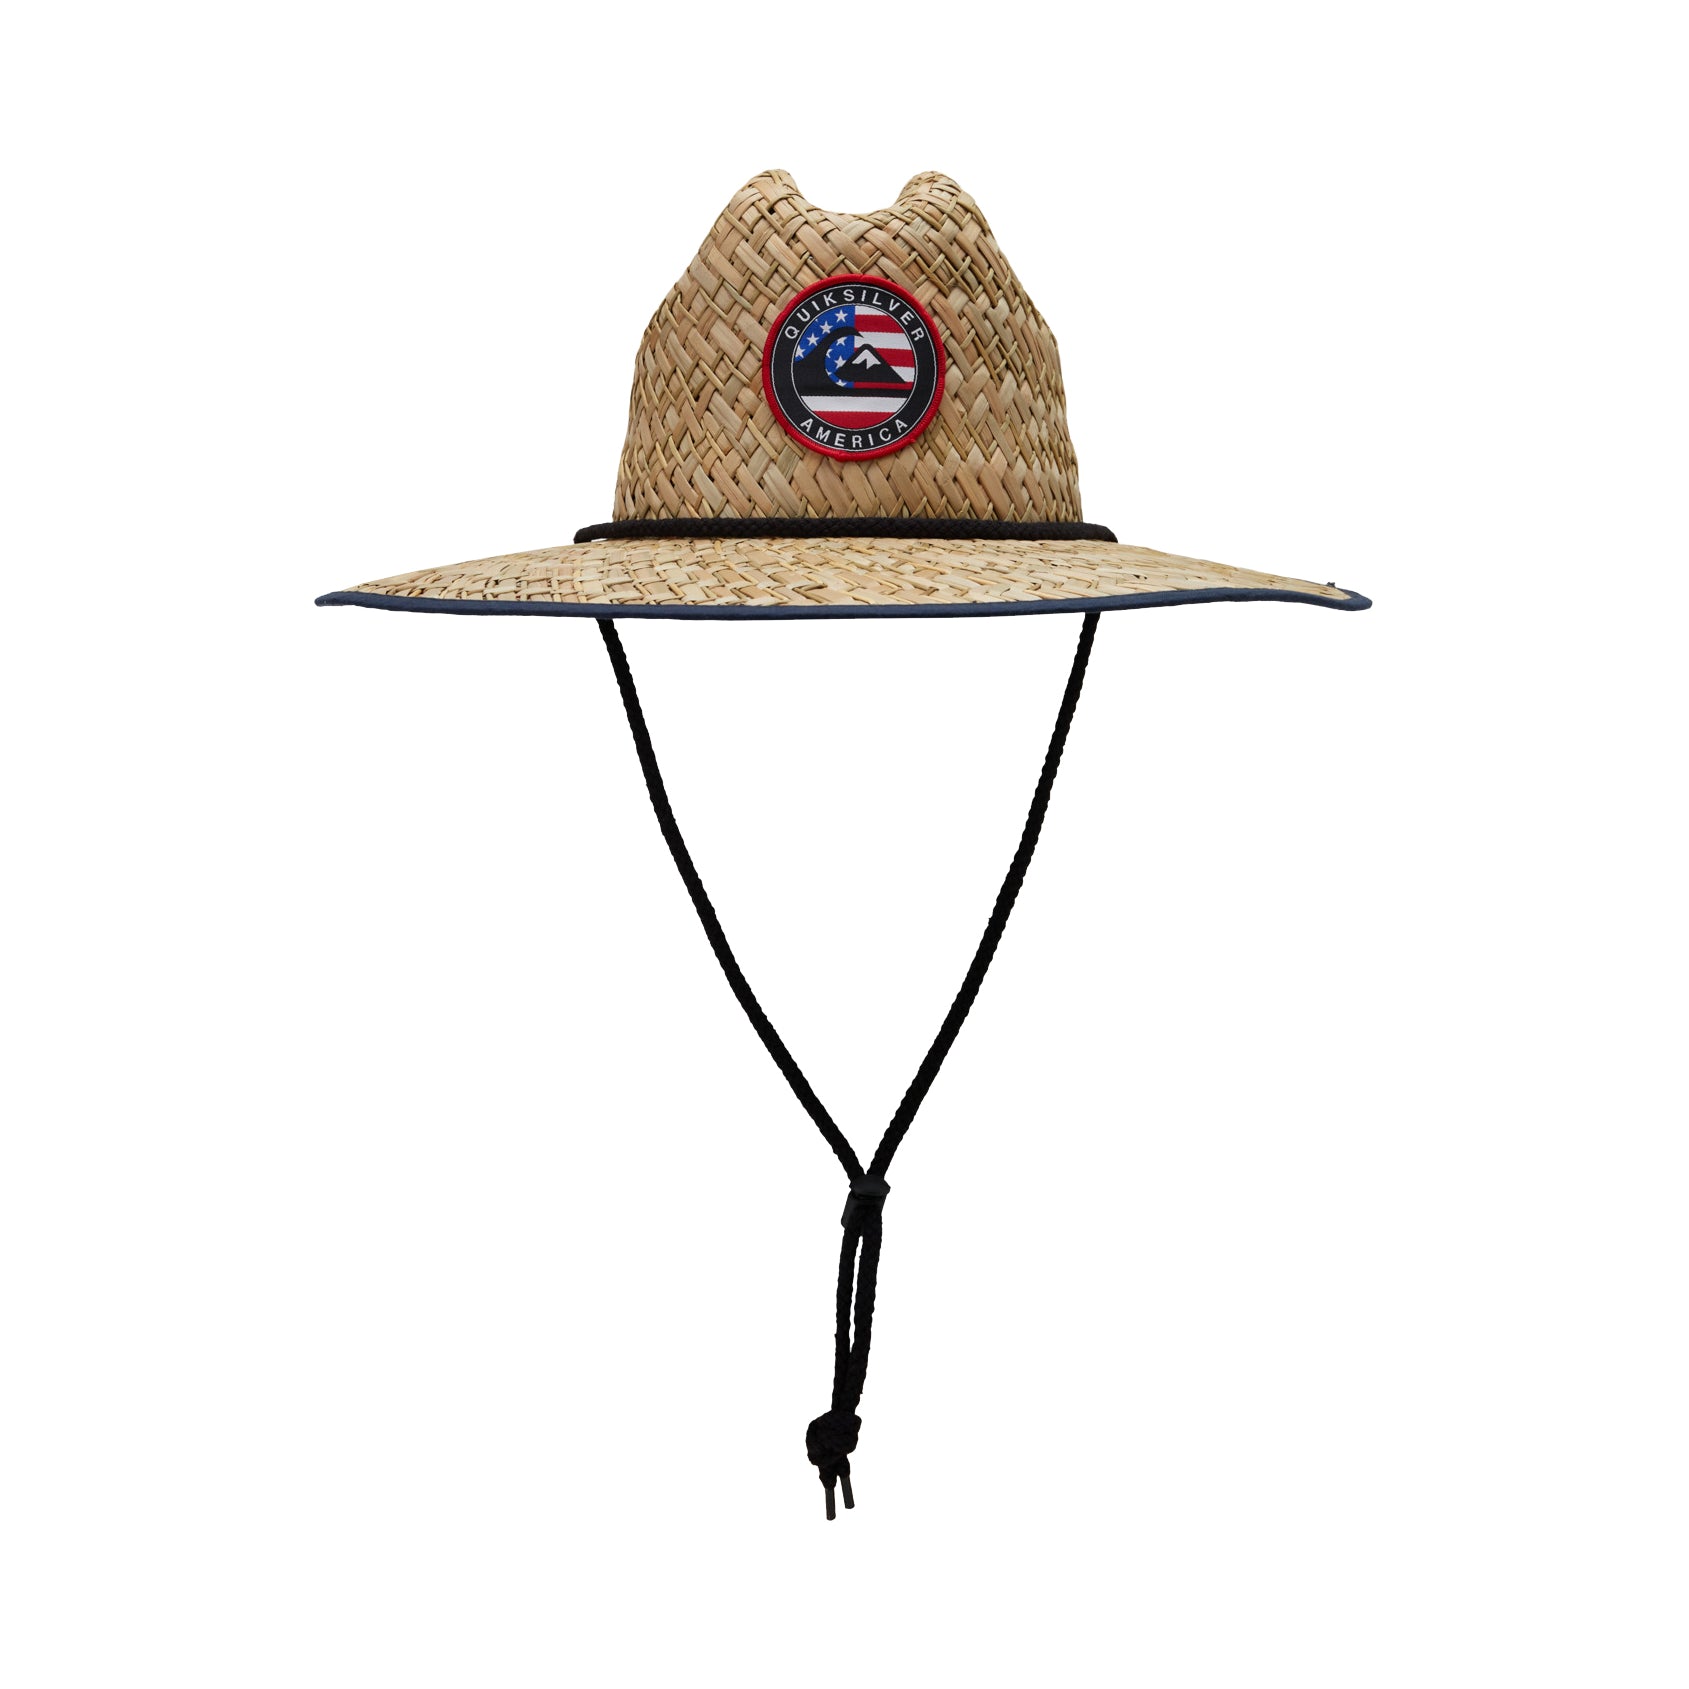 Quiksilver Outsider Americana Straw Lifeguard Hat XBBR S/M